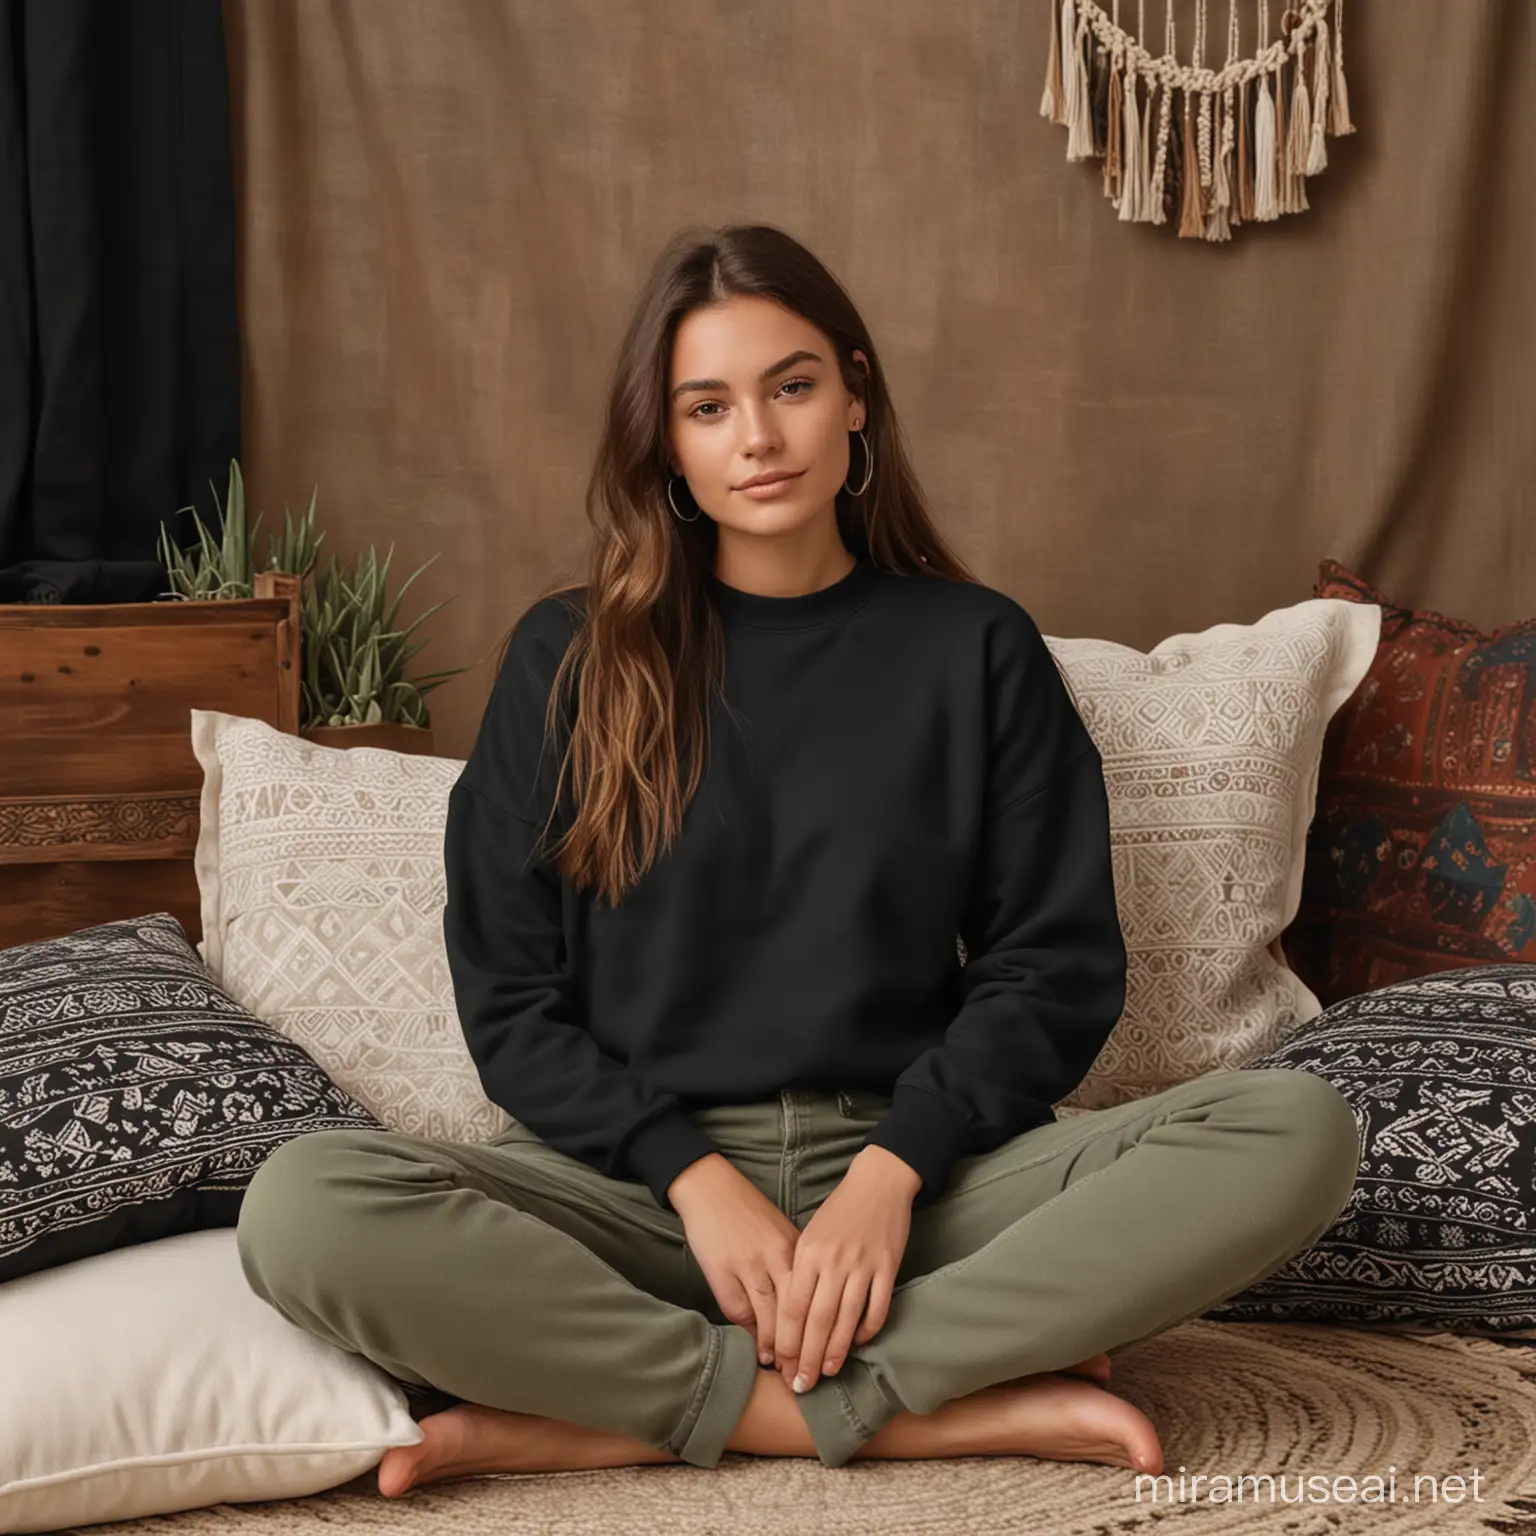 young women, wearing a black crewneck sweatshirt, boho background with pillows, sitting down, facing the camera